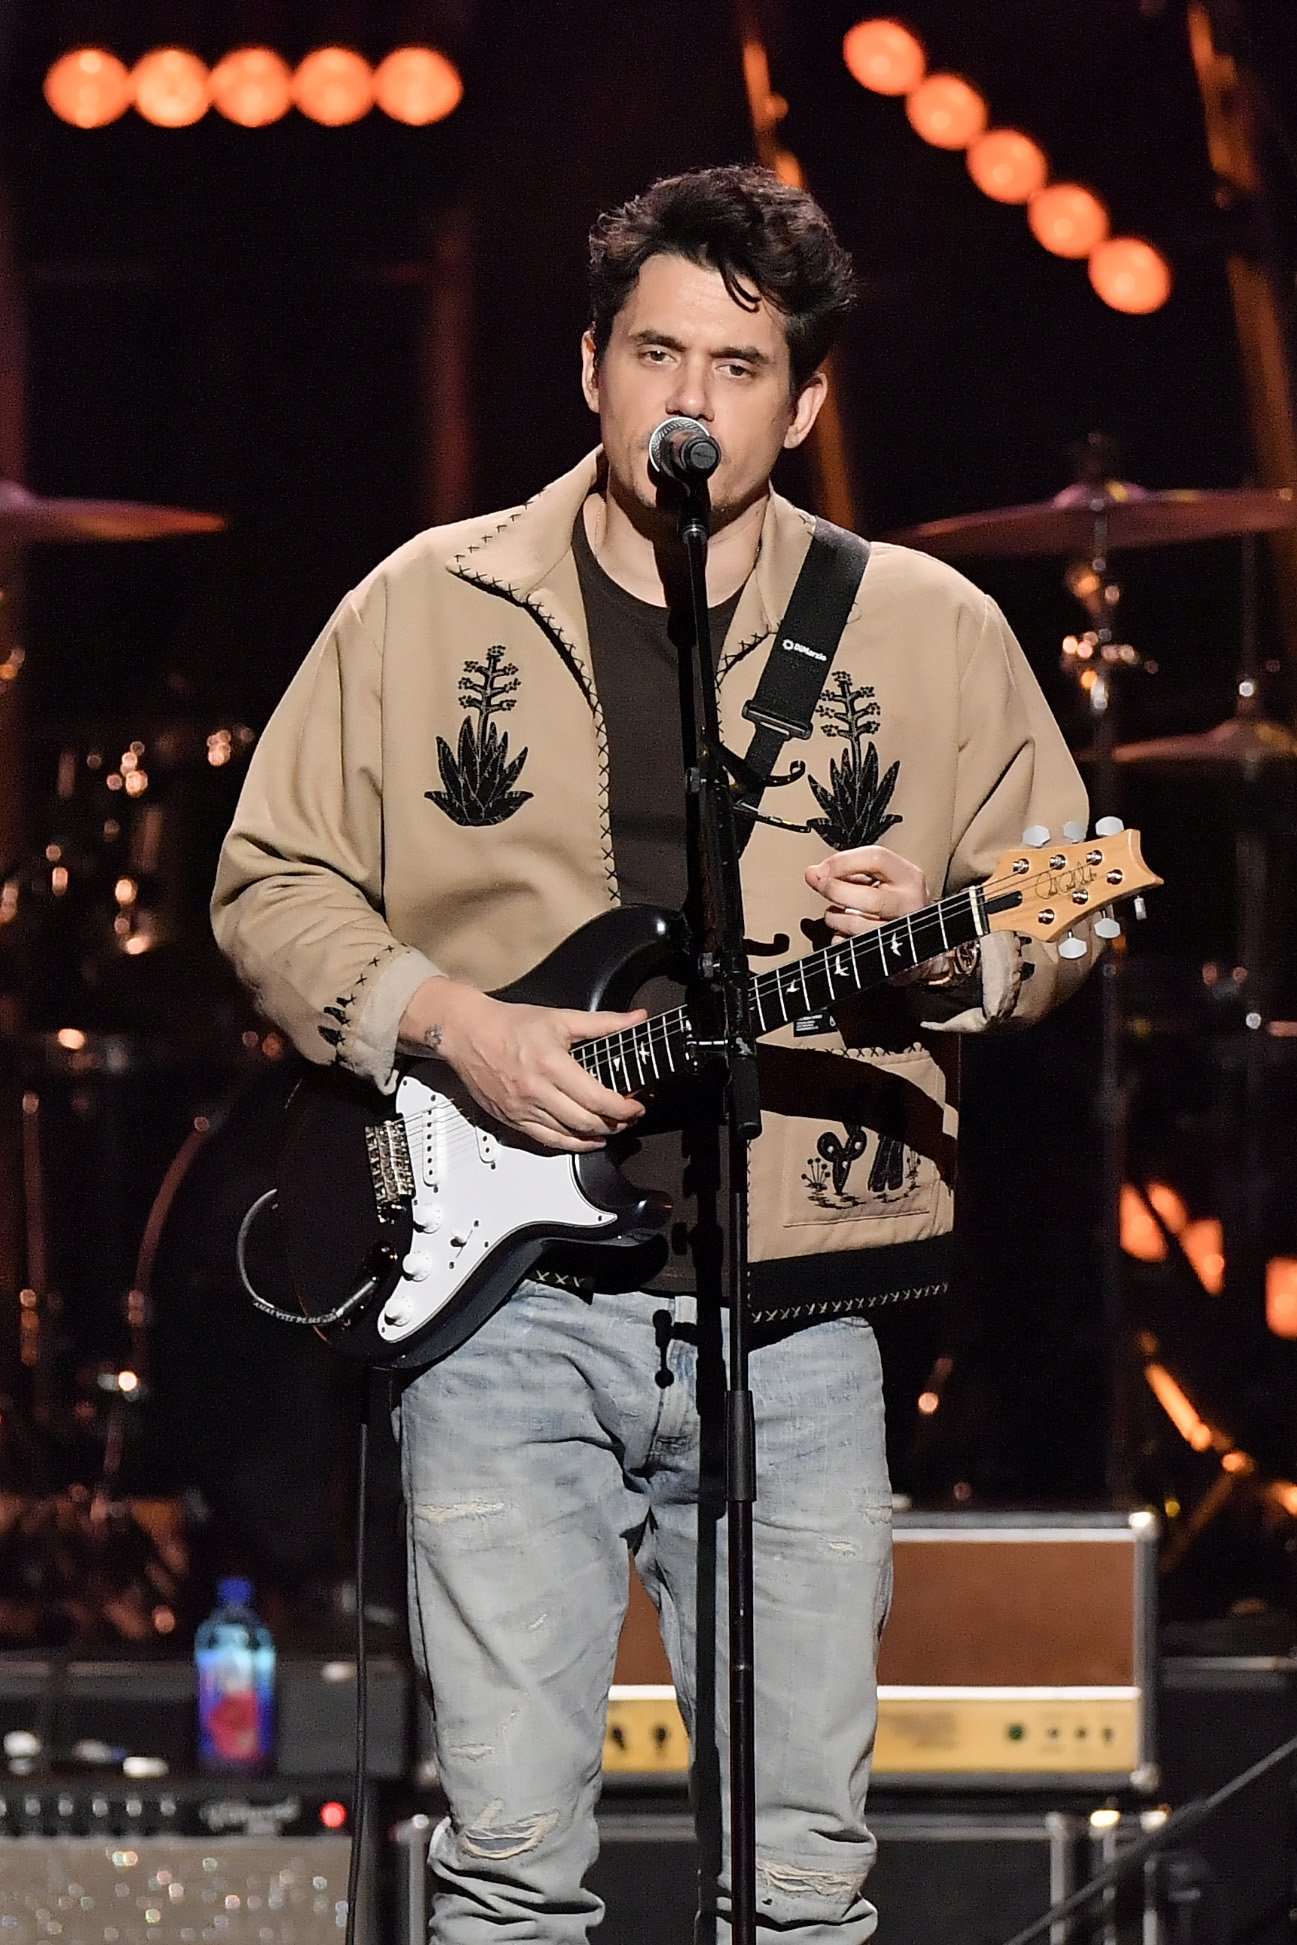 John Mayer performs at the 26th Annual Power of Love gala